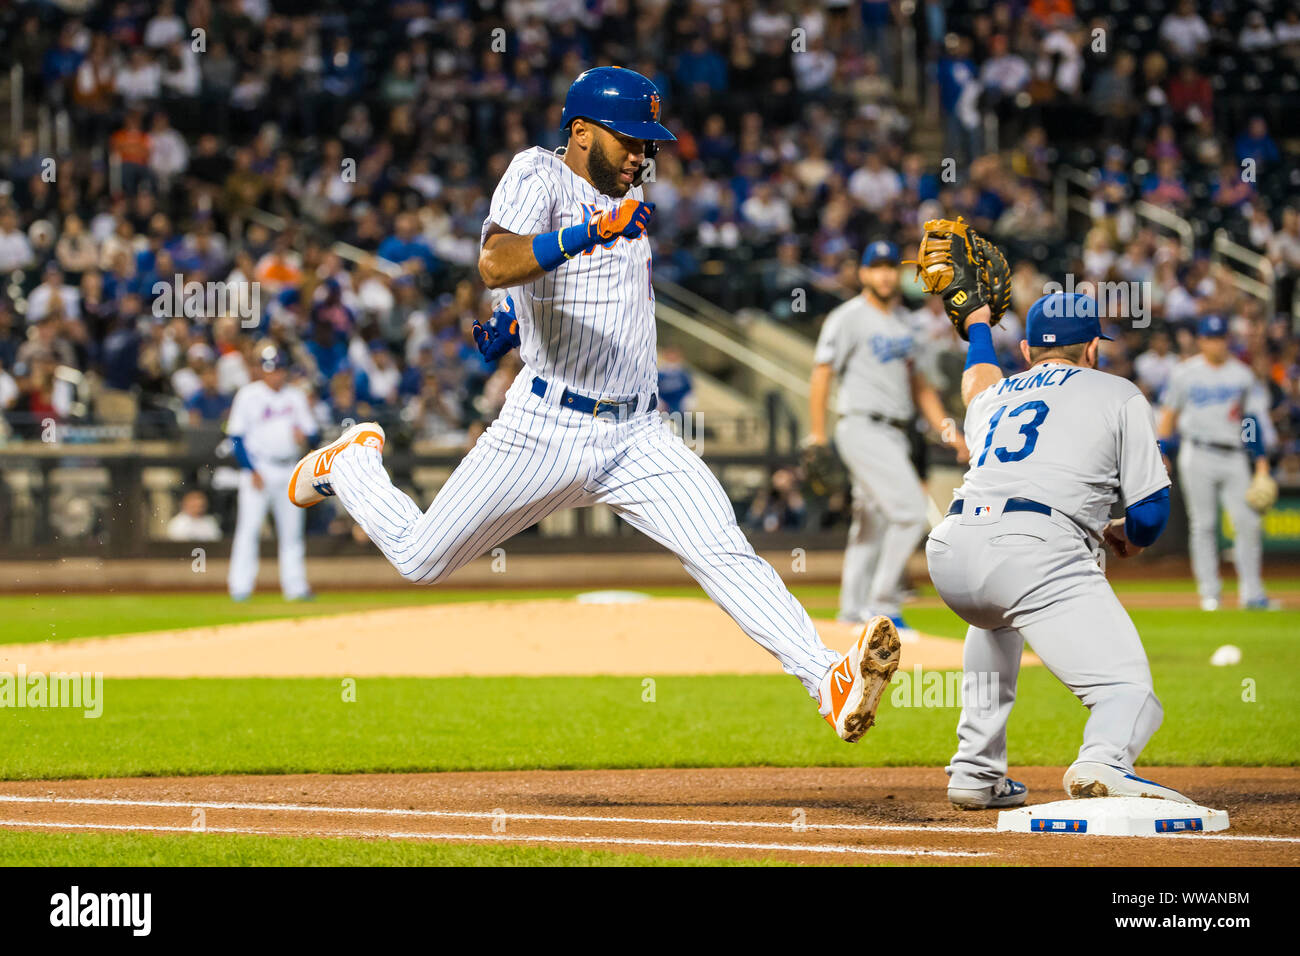 Queens, New York, USA. 13th Sep, 2019. New York Mets shortstop Amed Rosario (1) runs out a ground ball during the game between The New York Mets and The Los Angeles Dodgers at Citi Field in Queens, New York. Mandatory credit: Kostas Lymperopoulos/CSM/Alamy Live News Stock Photo